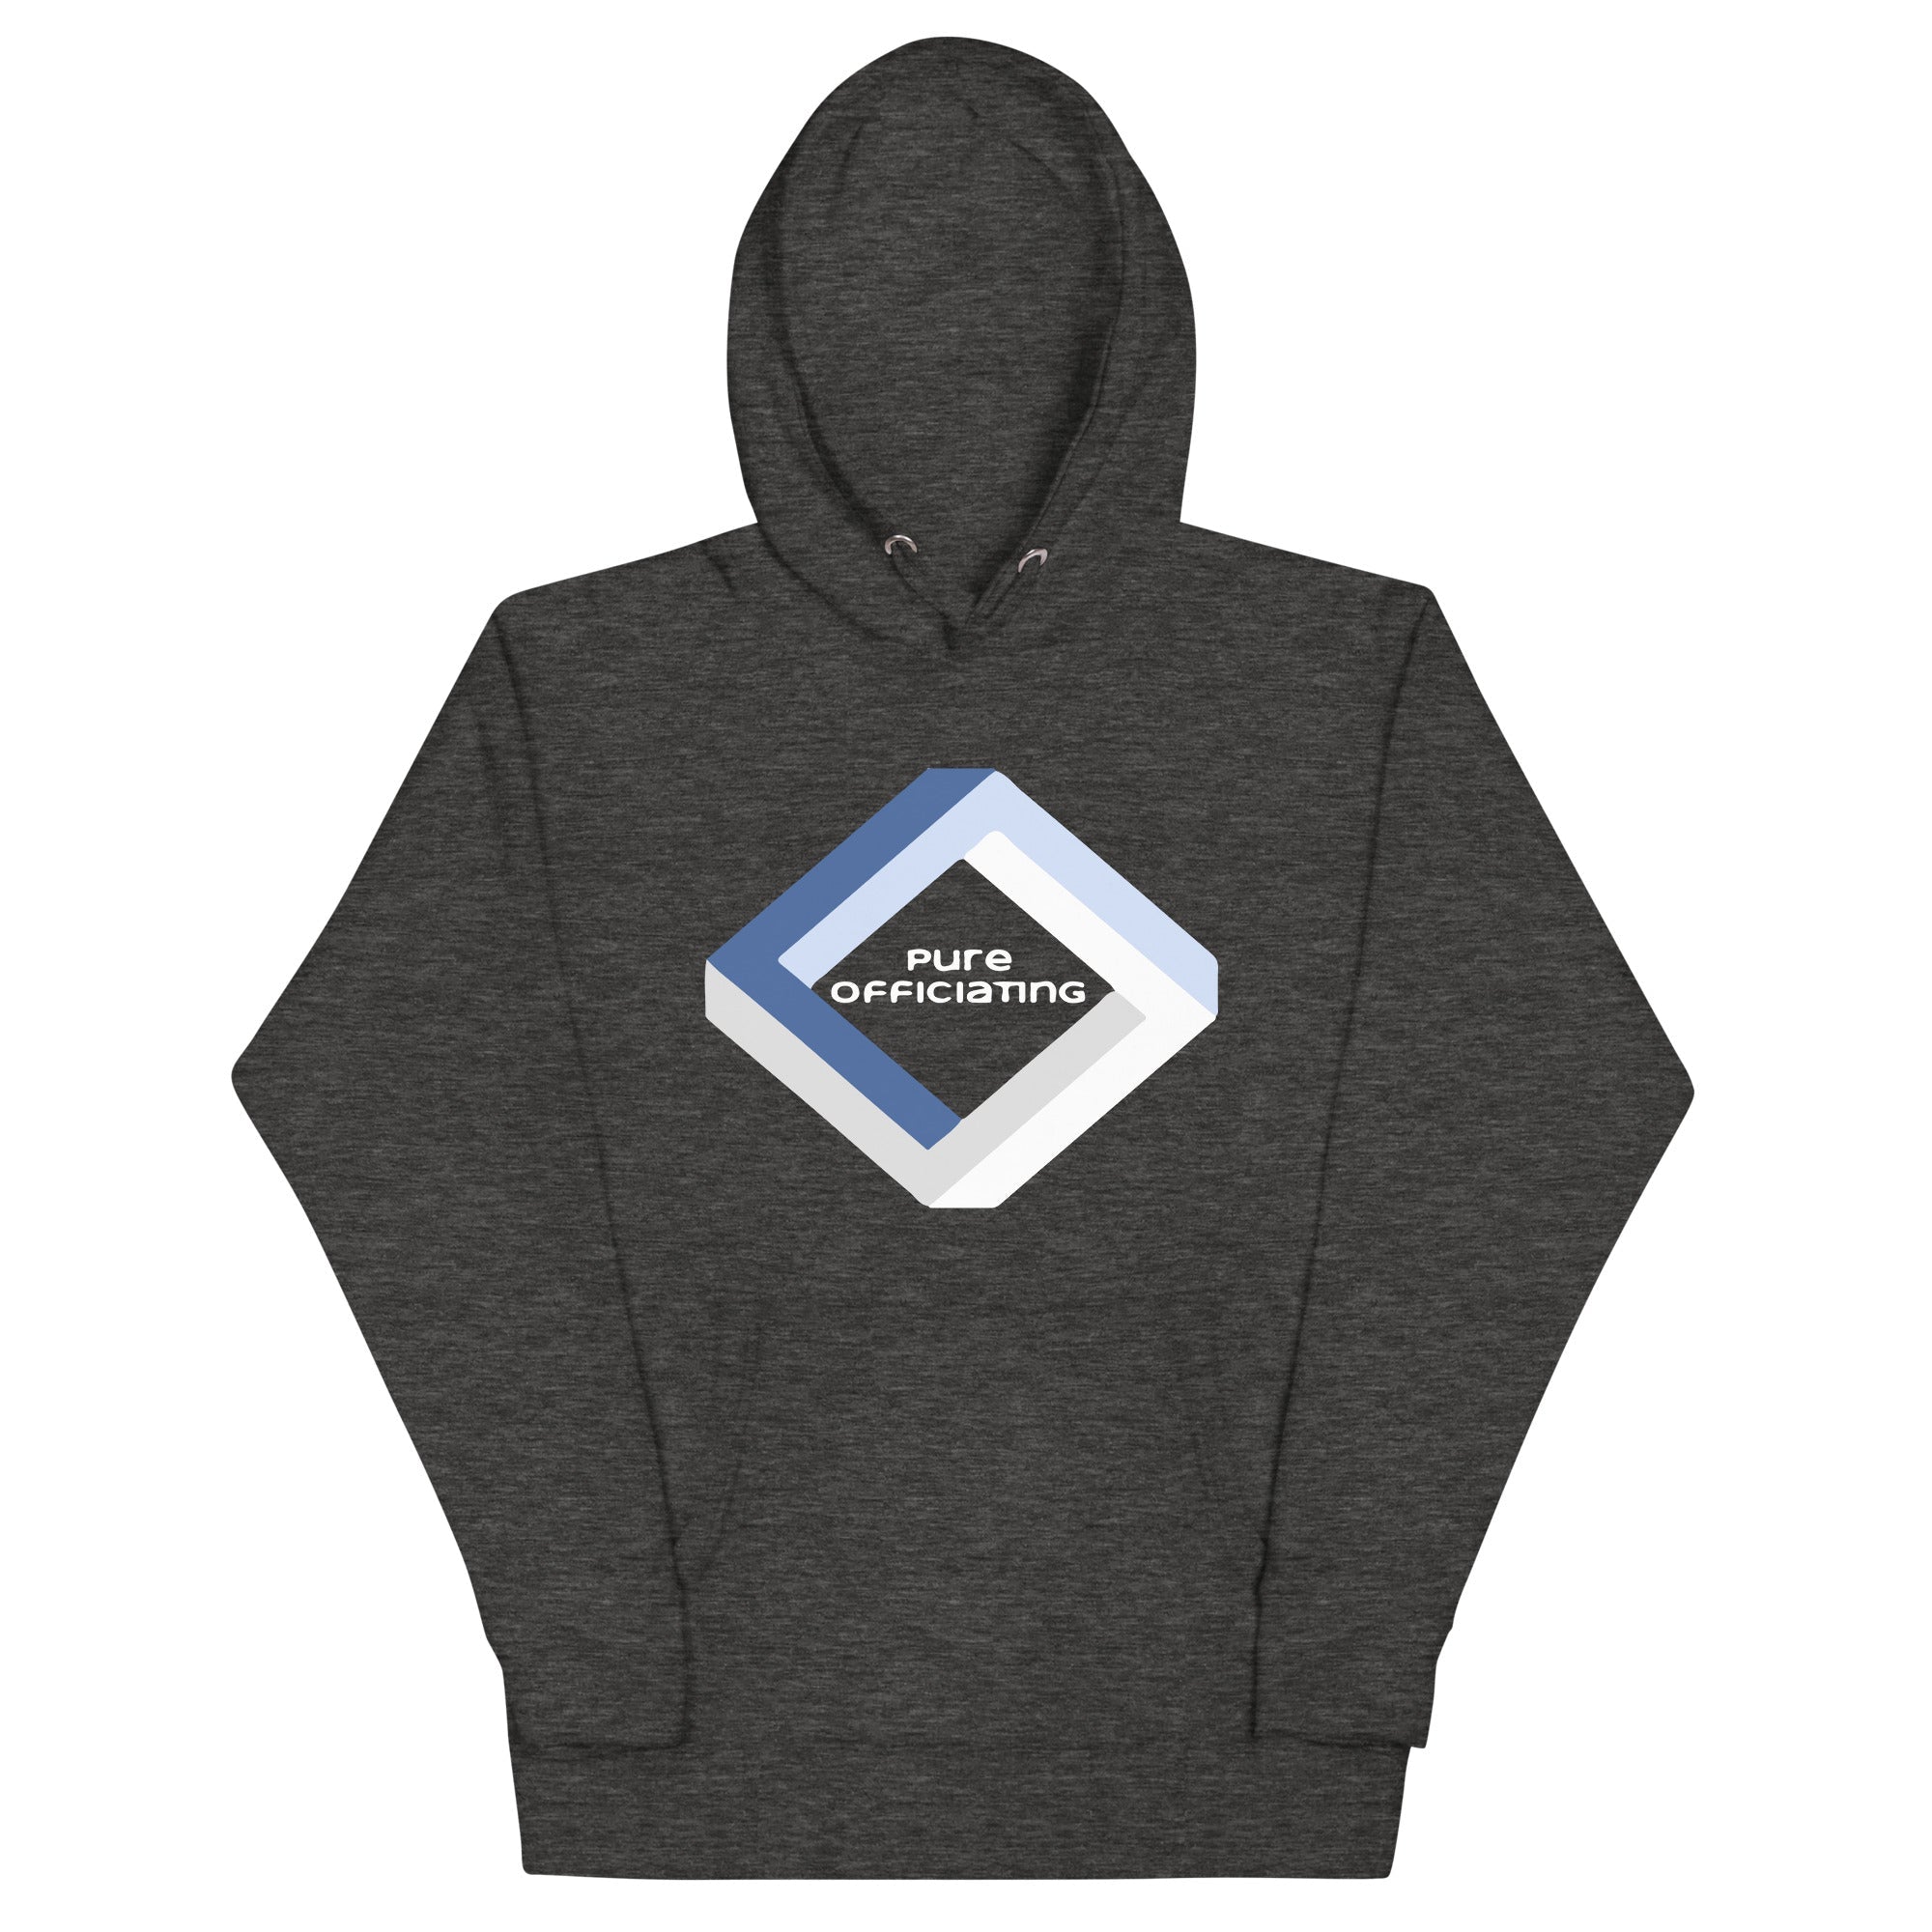 PURE OFFICIATING Unisex Hoodie v2